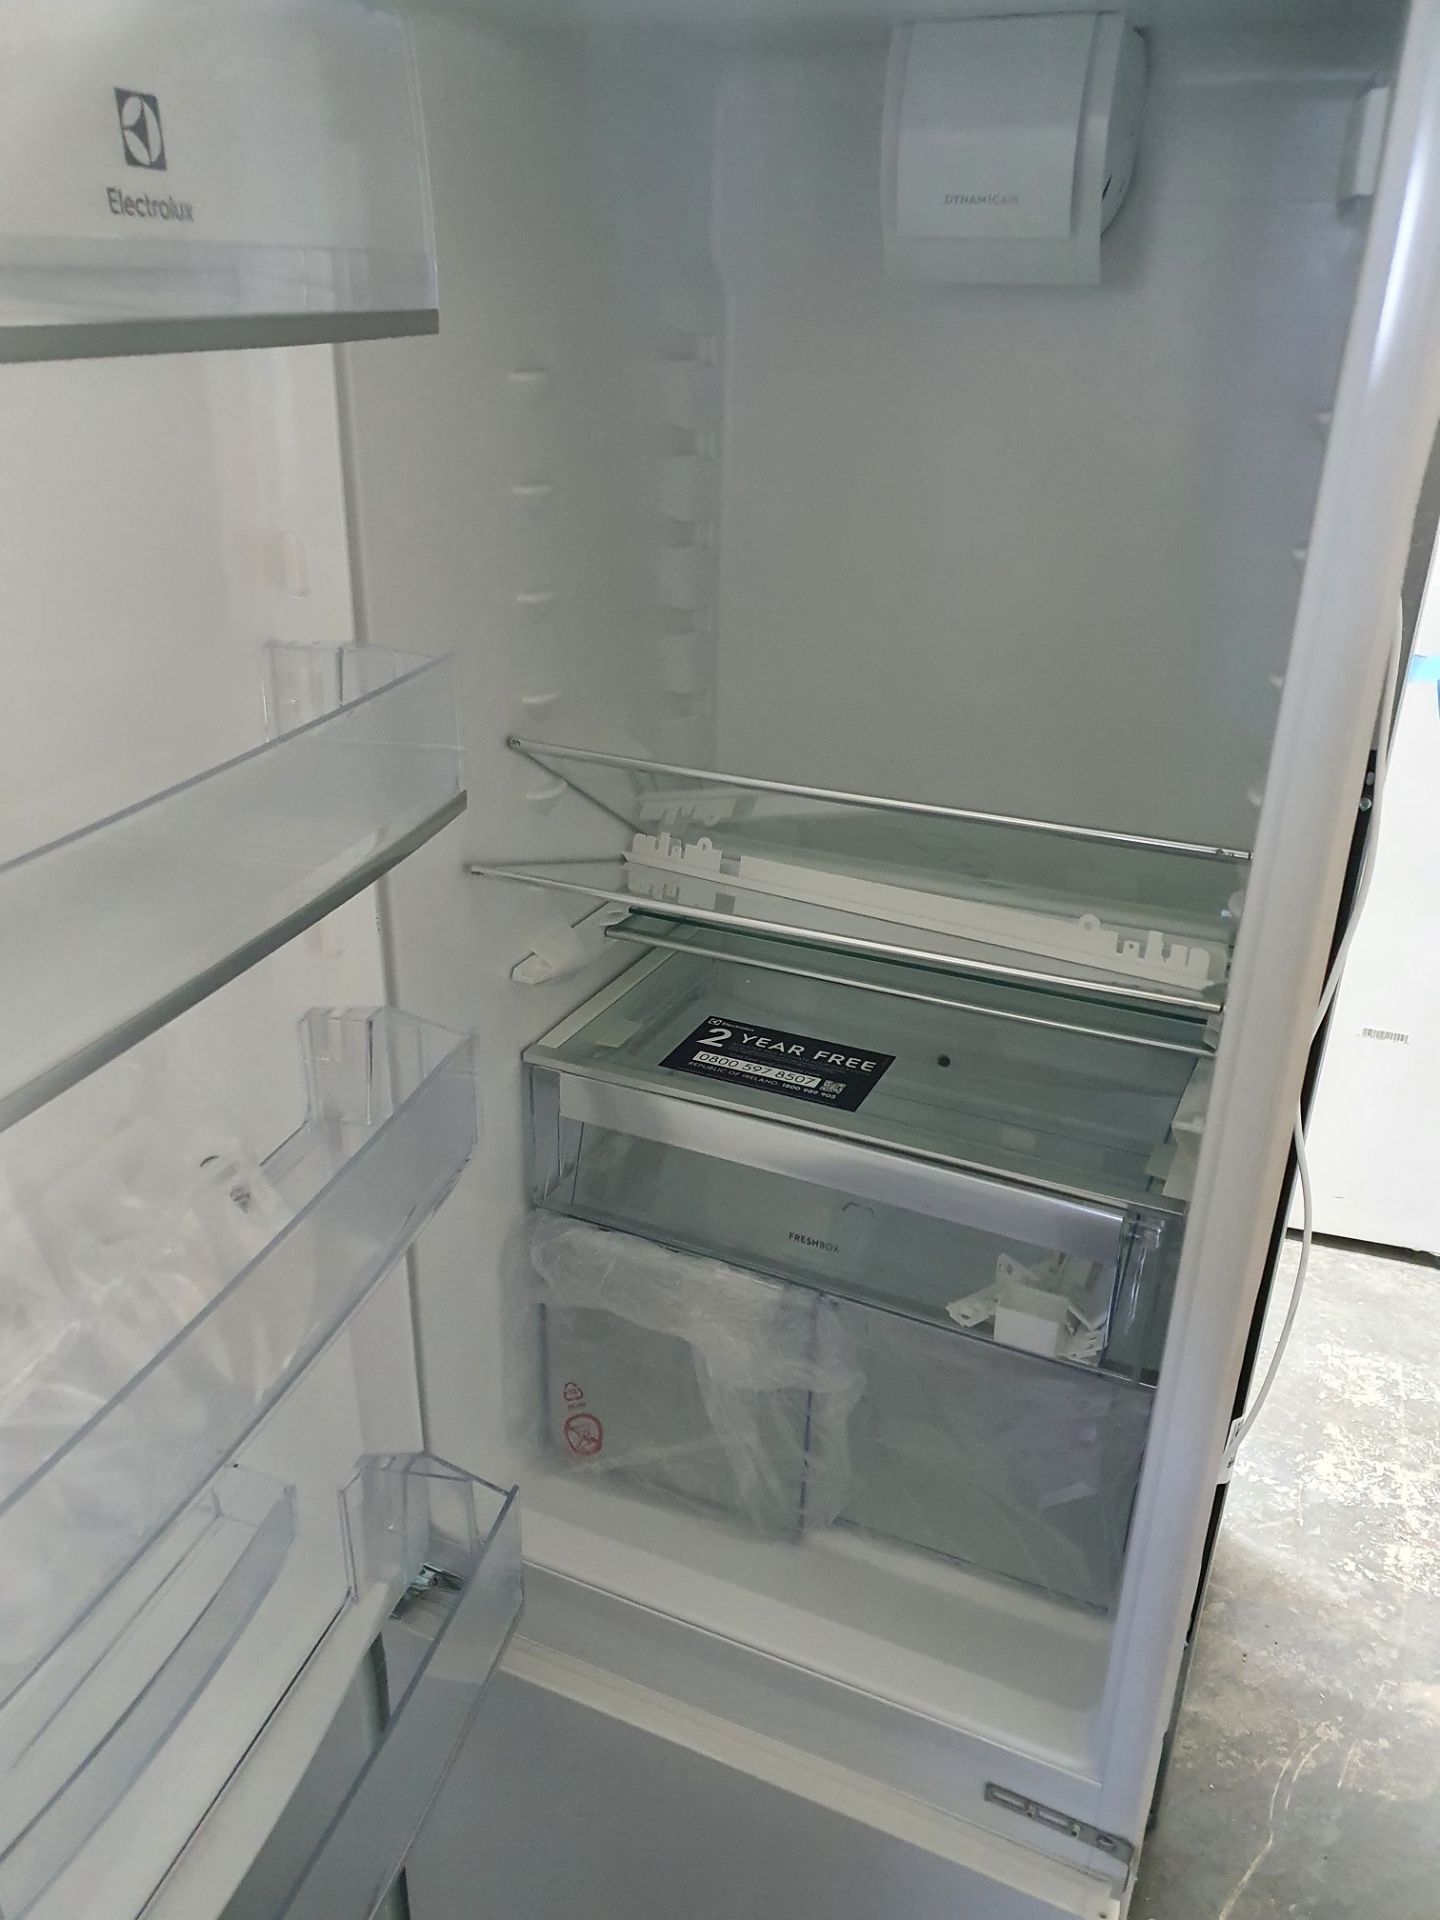 NEW/GRADED AND UNPACKAGED Whirlpool, ART6550/A+SF.1, Integrated Fridge Freezer (Brand new slight - Image 11 of 14